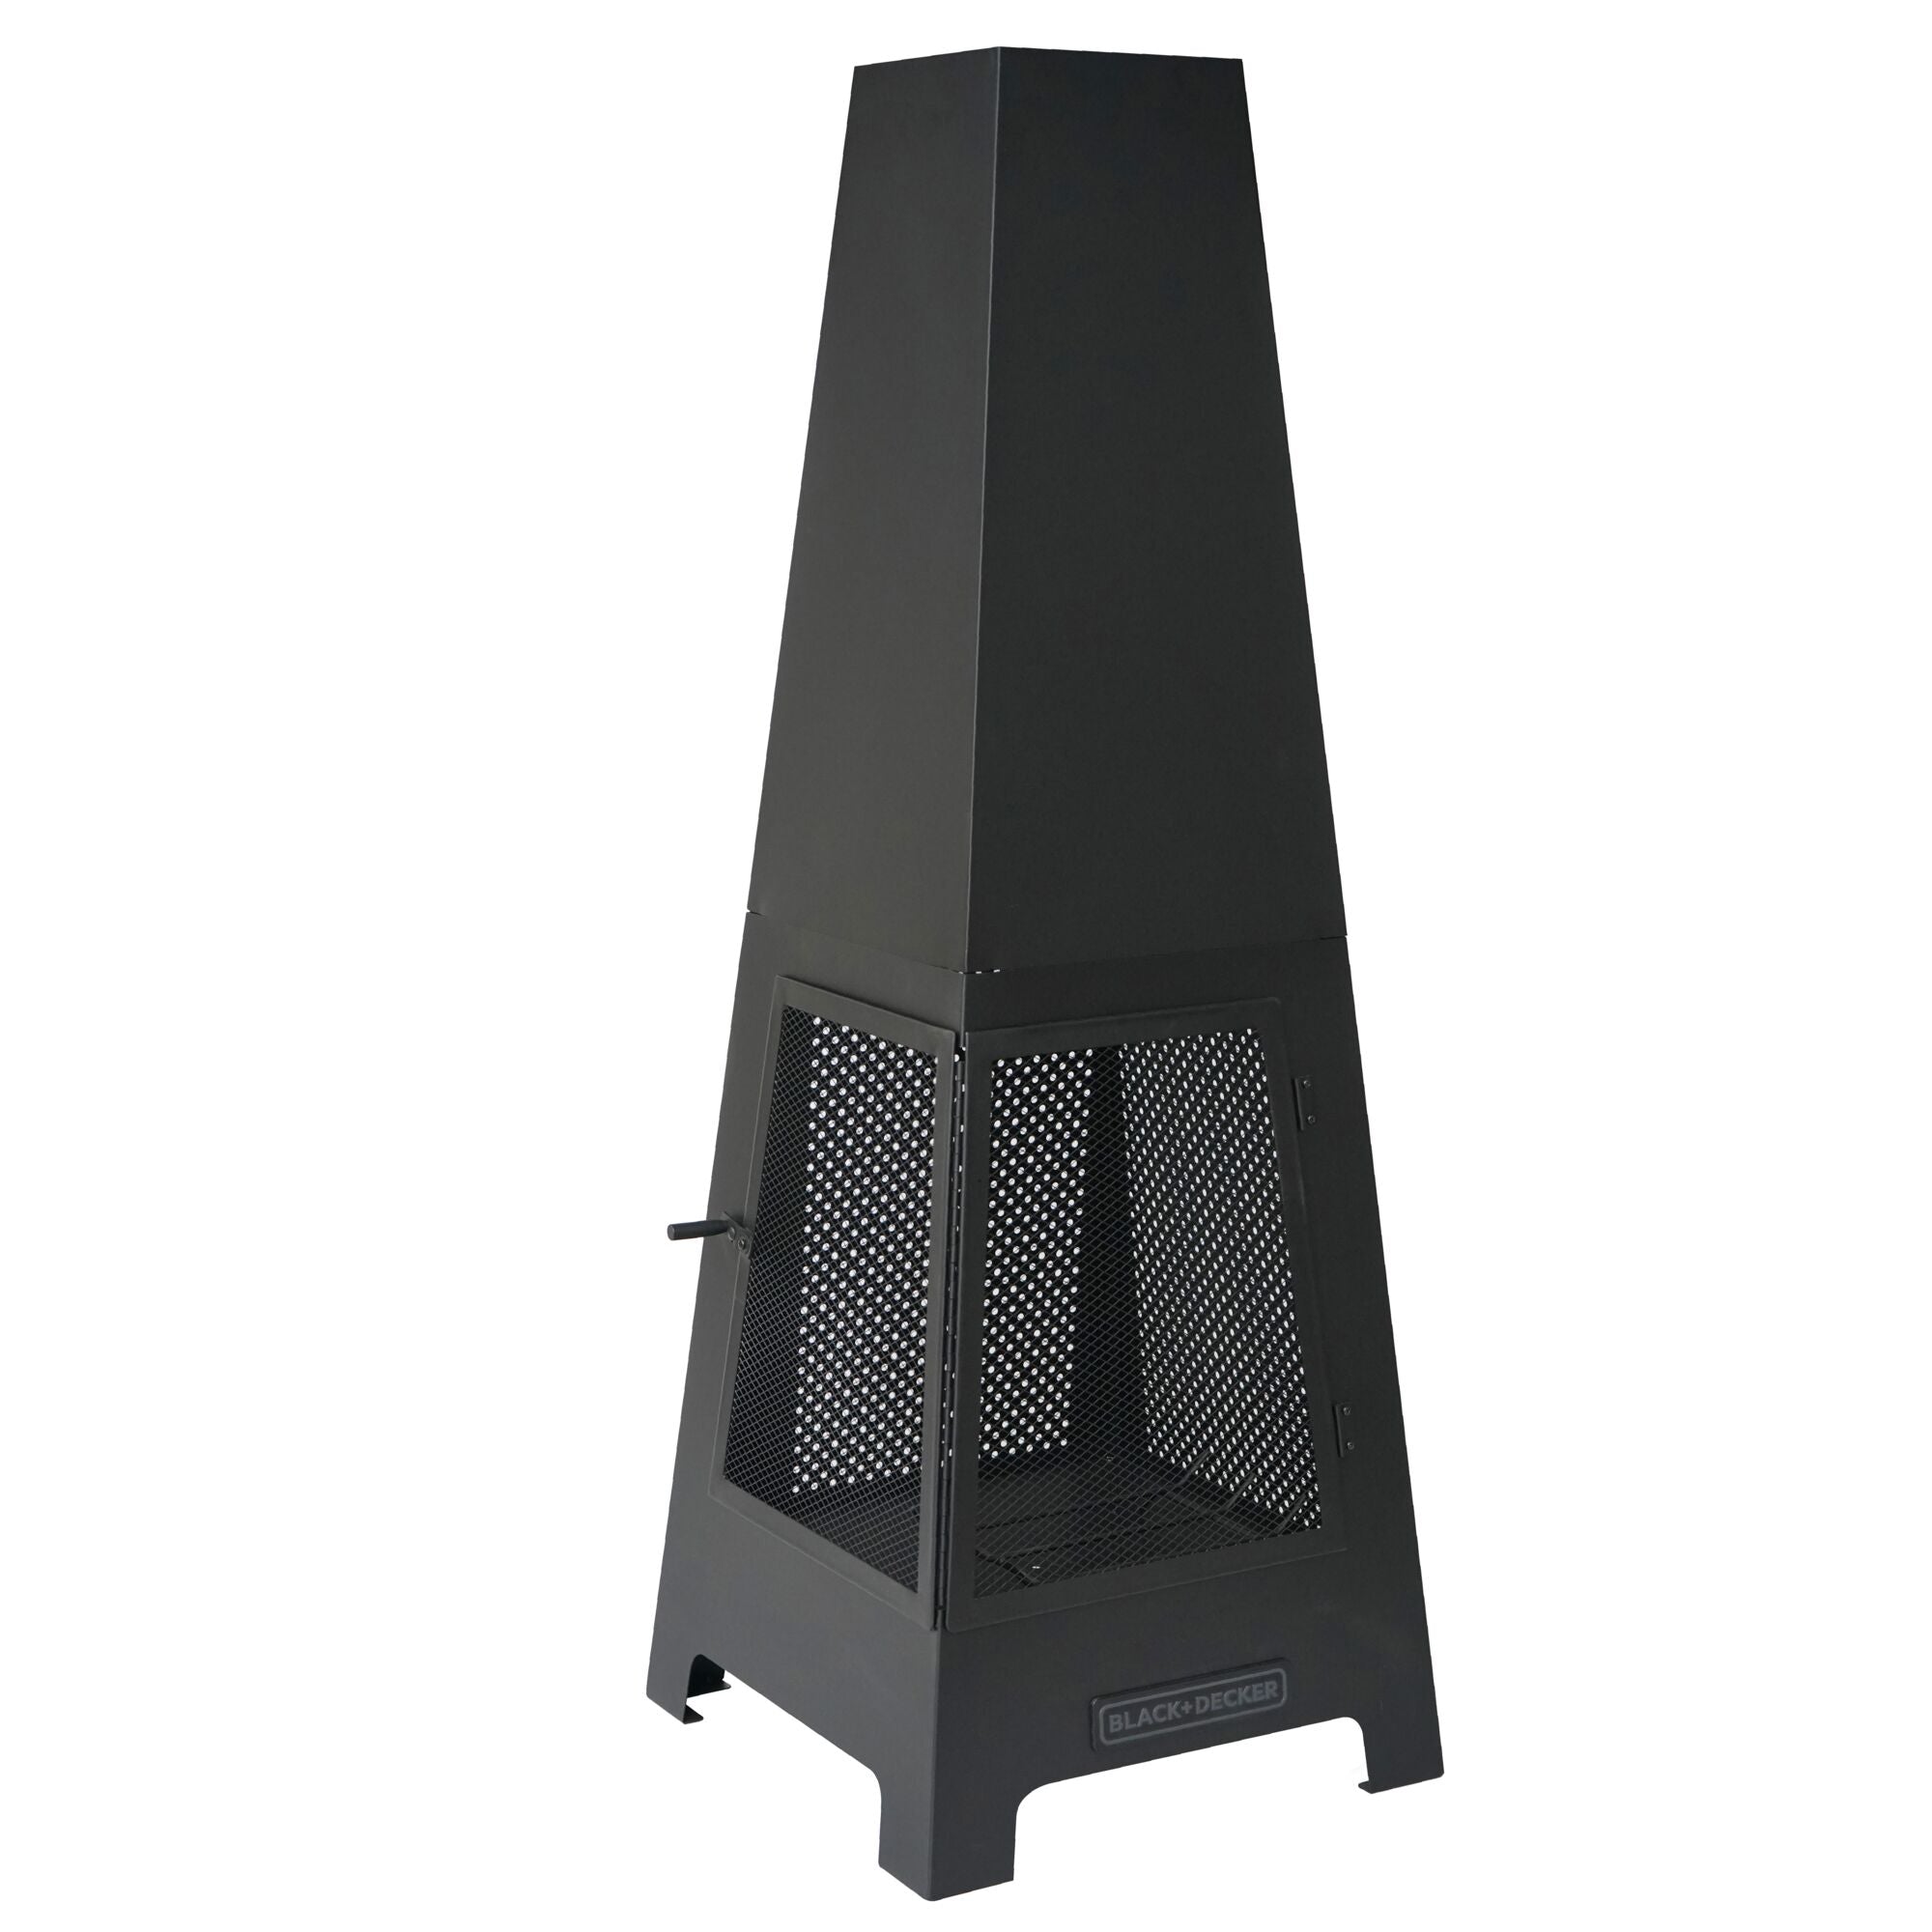 Front left-side view of black, triangular chimnea